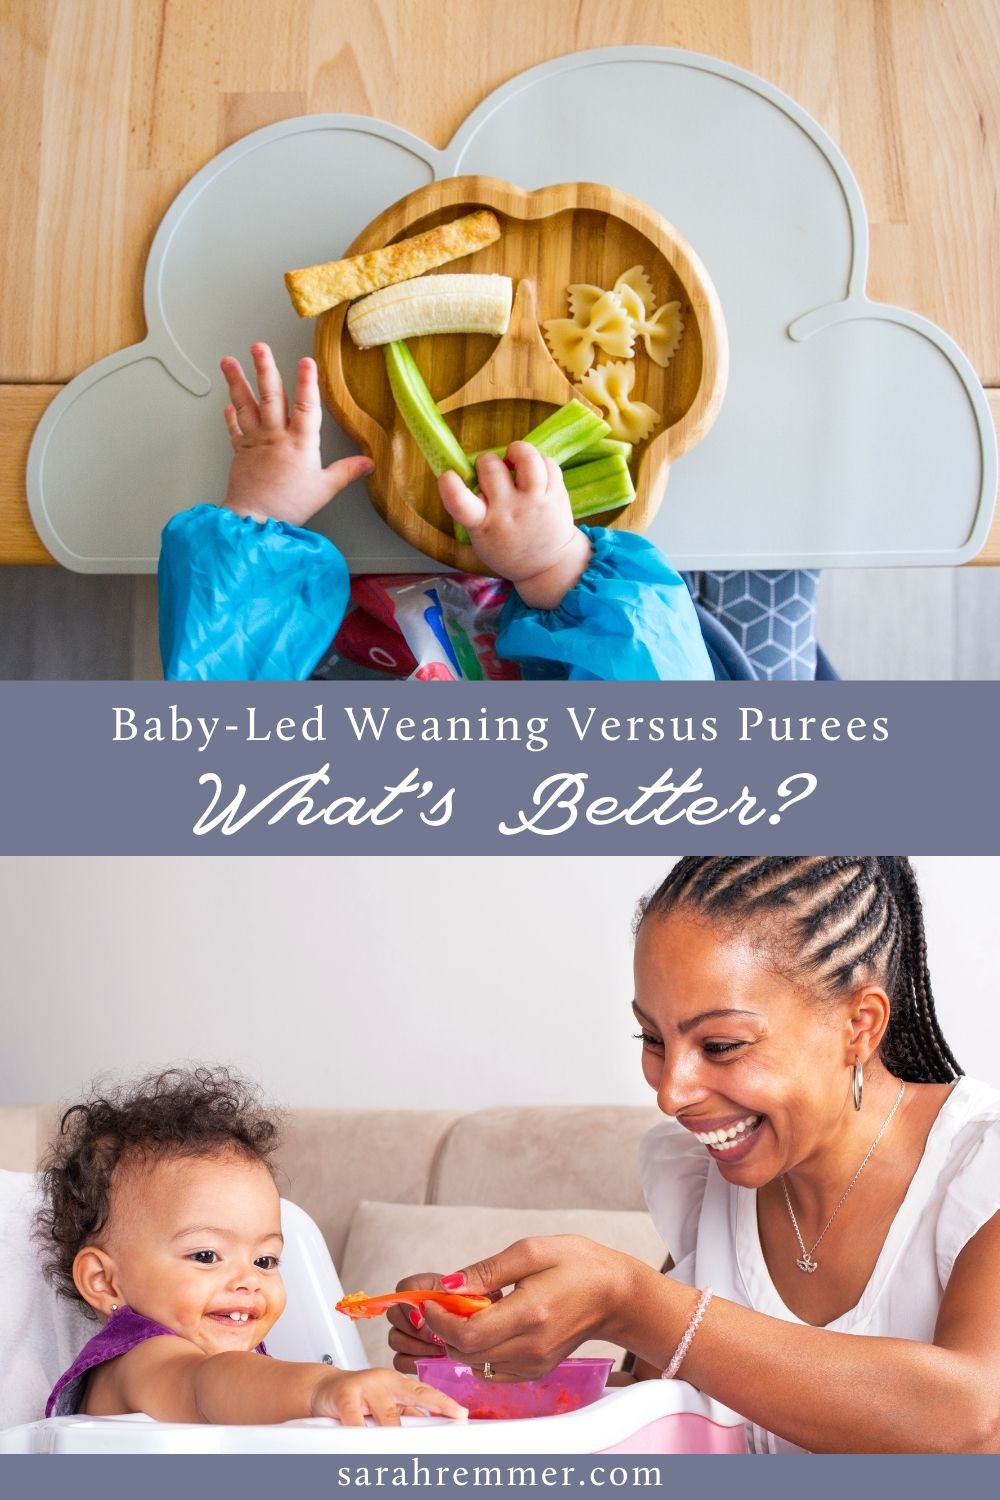 Here is everything you need to know from a pediatric registered dietitian on whether to introduce baby to solids using purees, by doing baby-led weaning, or a combination, and why.